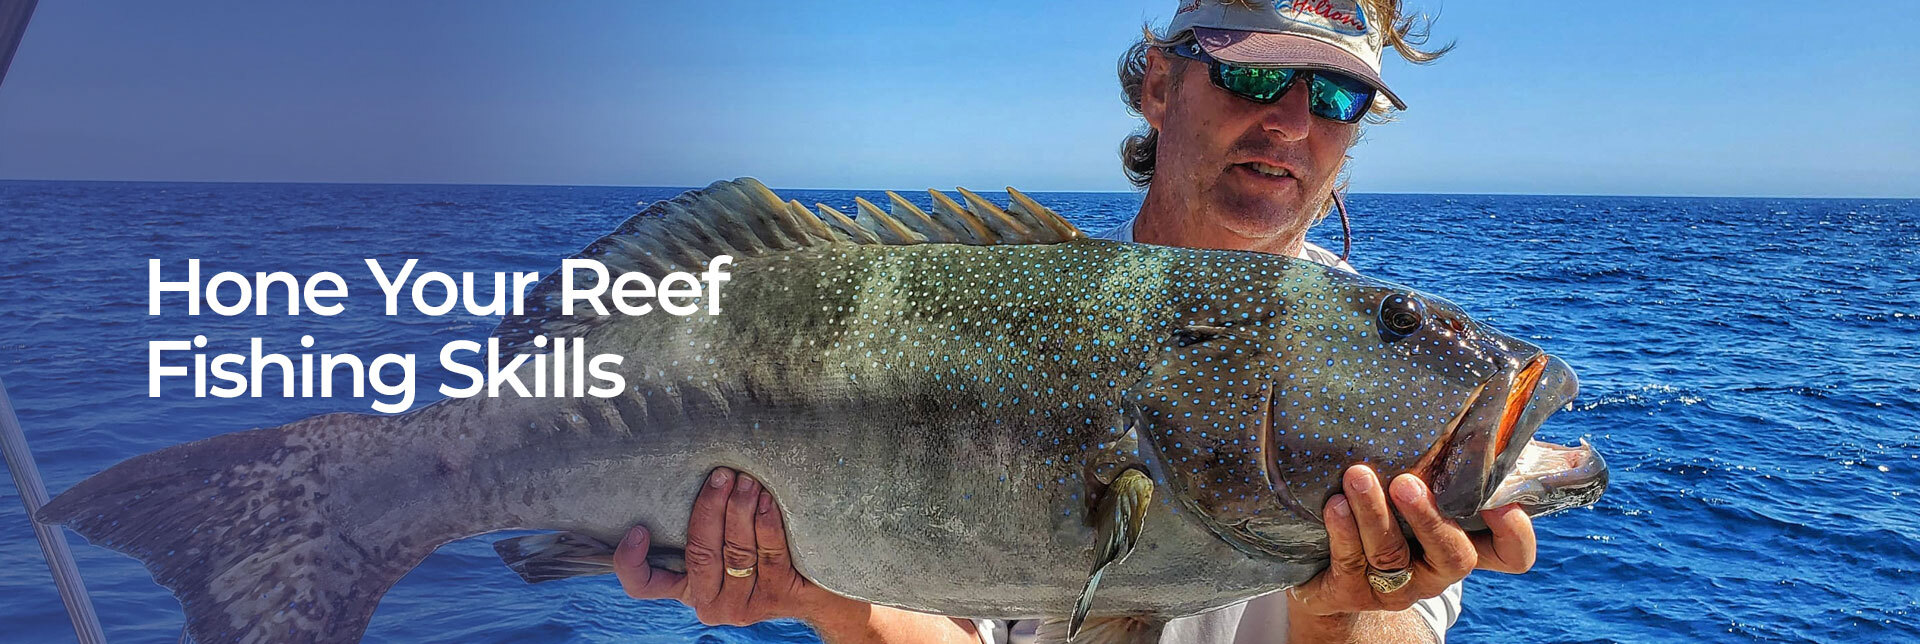 Reef - Hone Your Reef Fishing Skills, In the Spread Home Slider